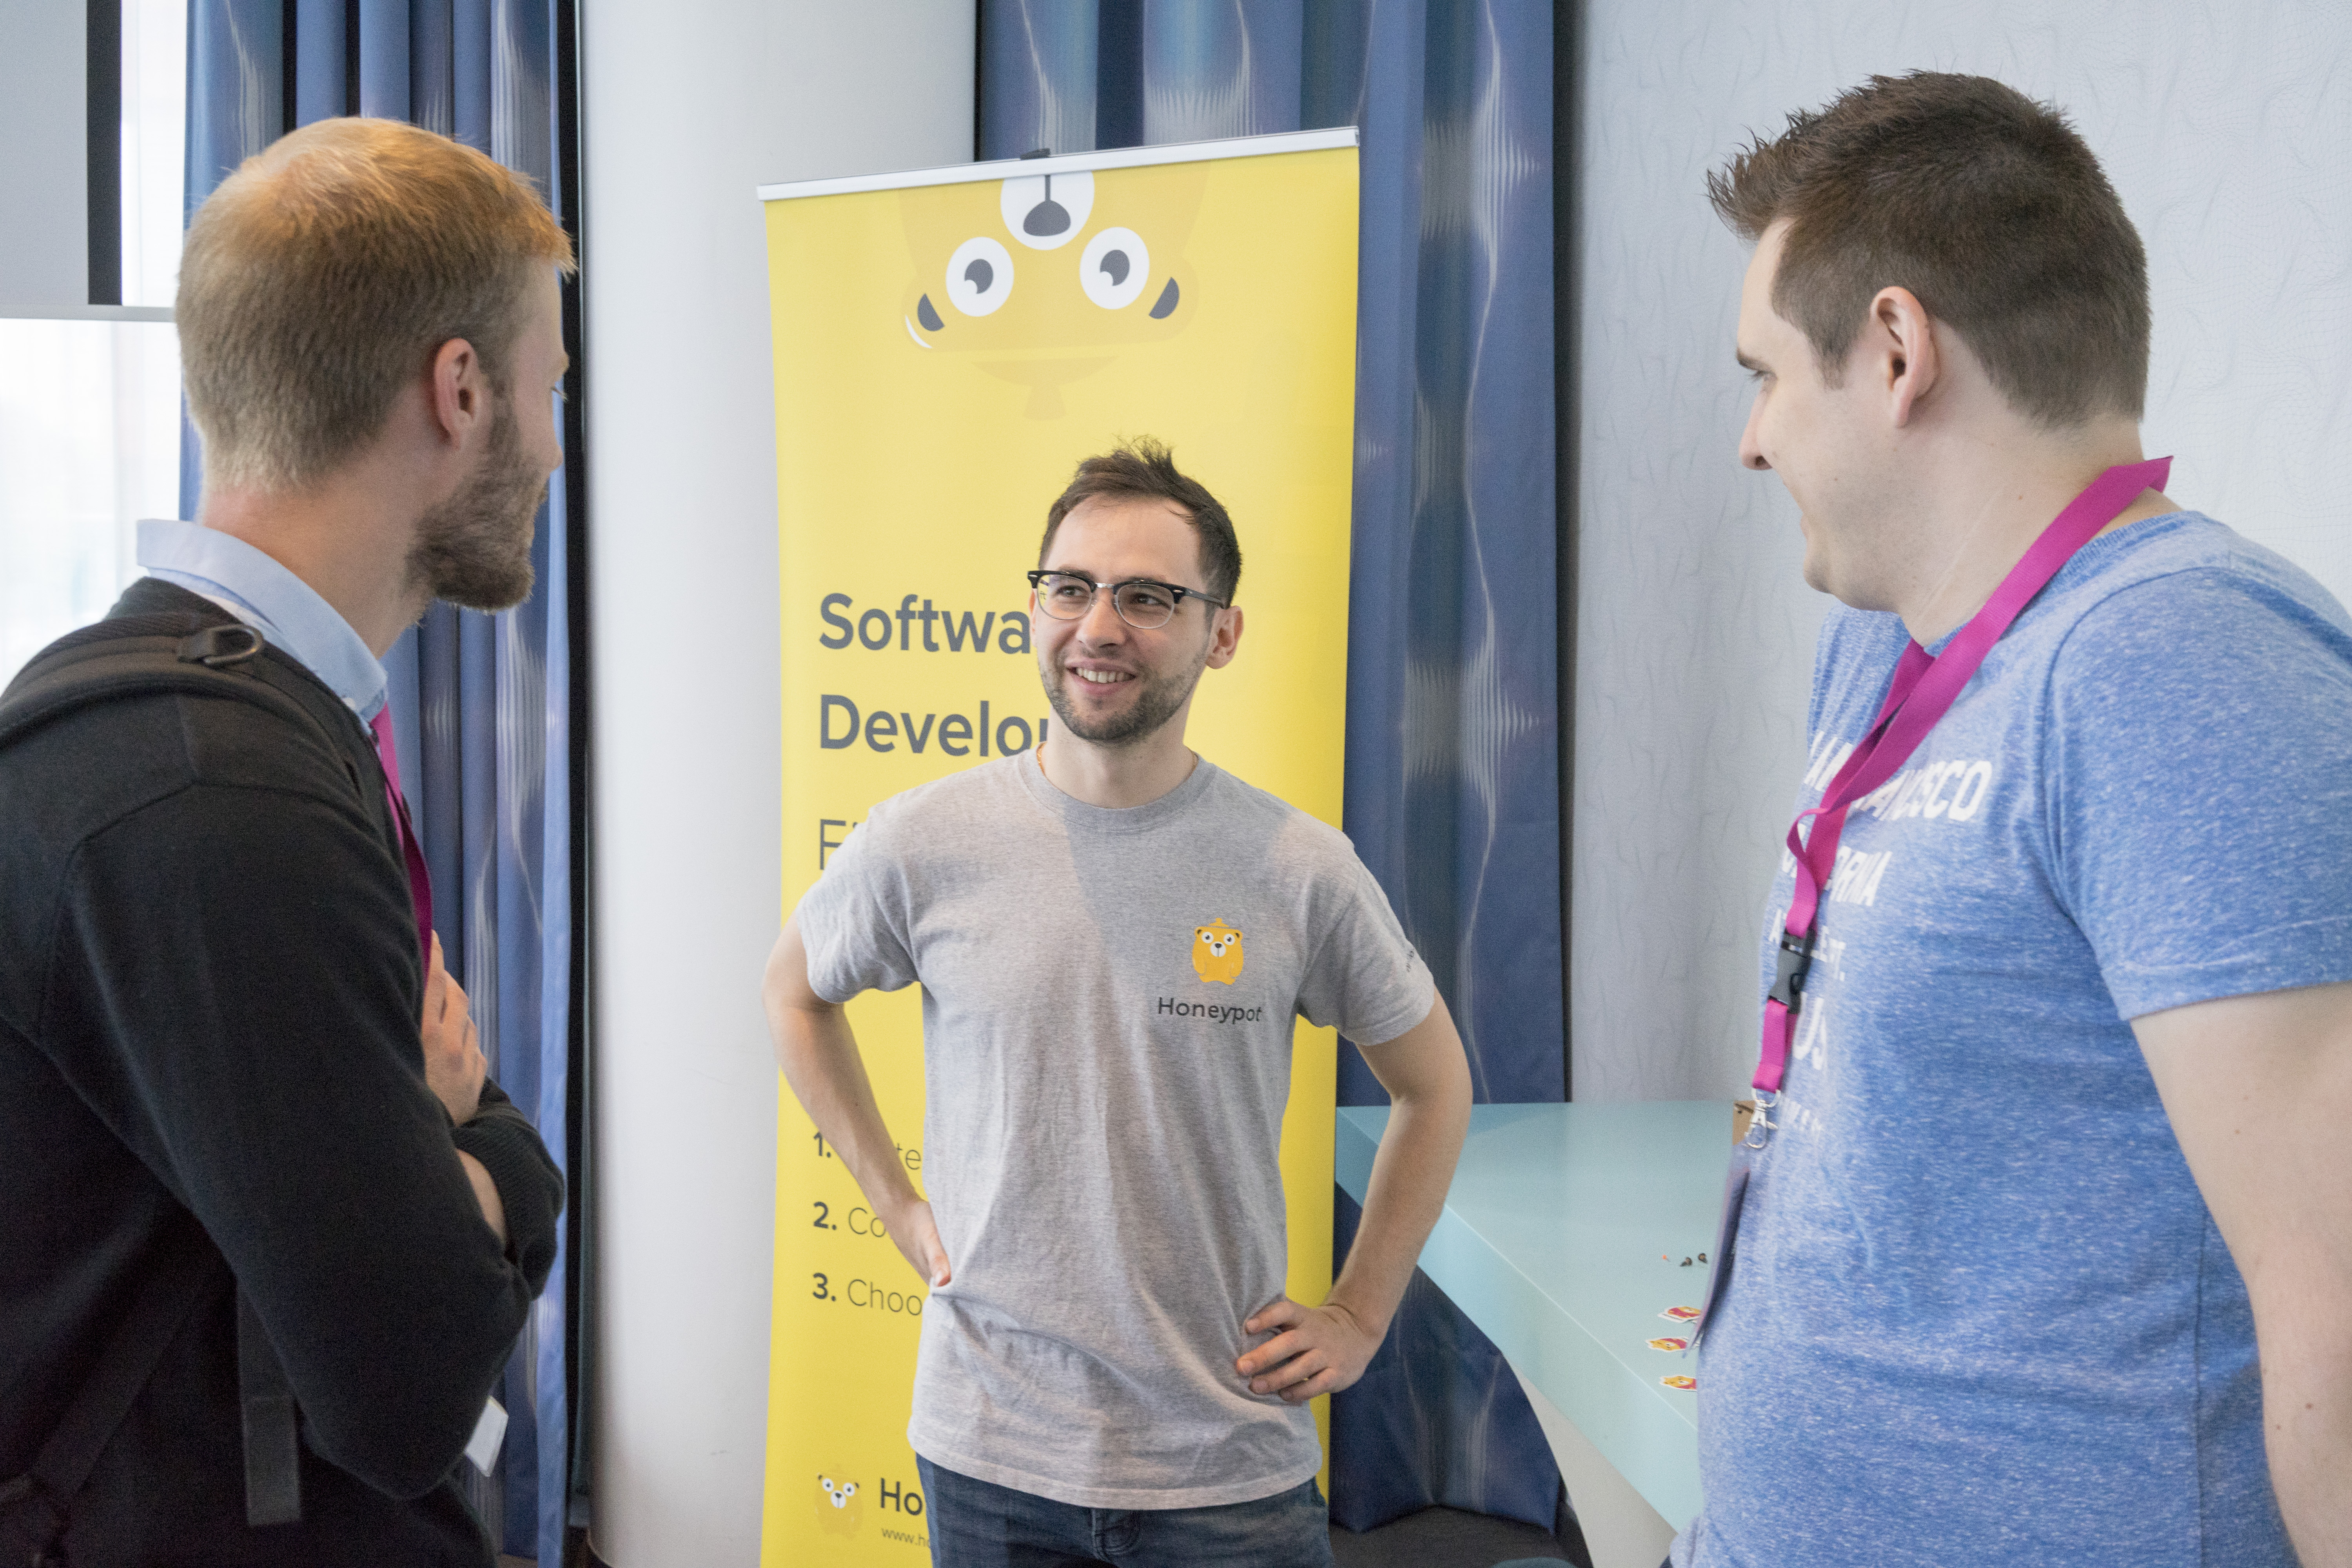 Florian, a former Talent Rep, and current Data Analyst, chatting with developers at GraphQL Conf 2018.